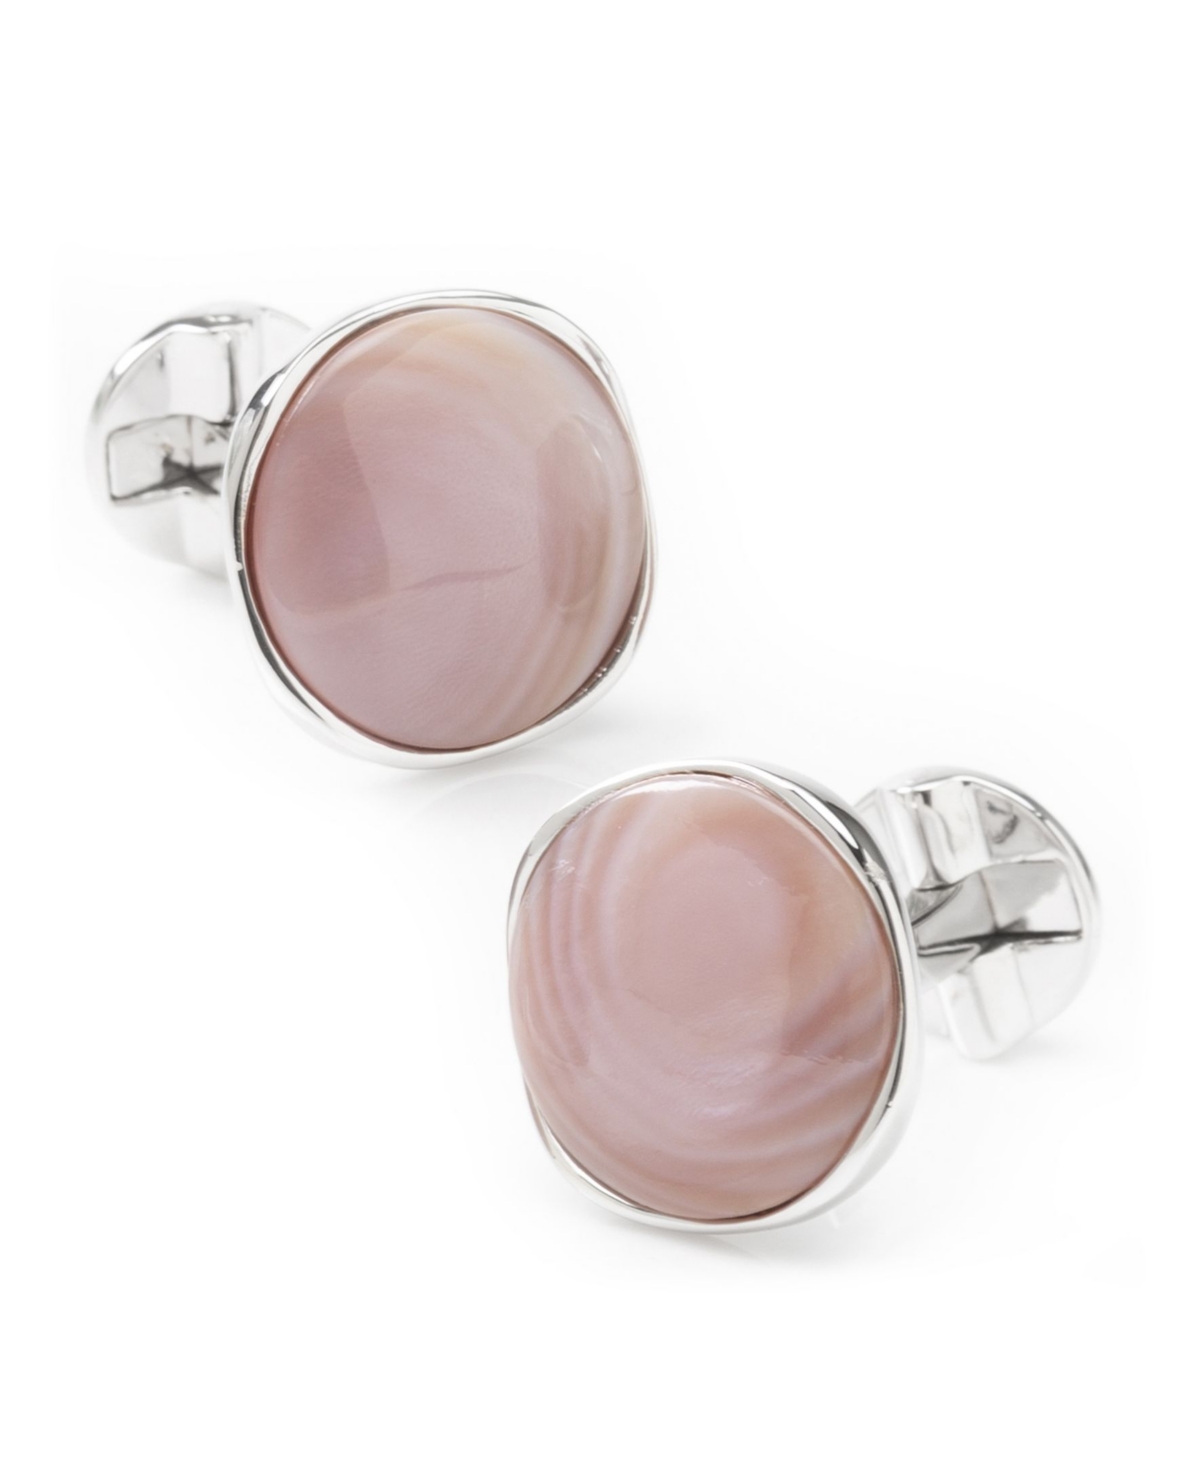 Men's Sterling Silver Classic Formal Mother of Pearl Cufflink - Pink